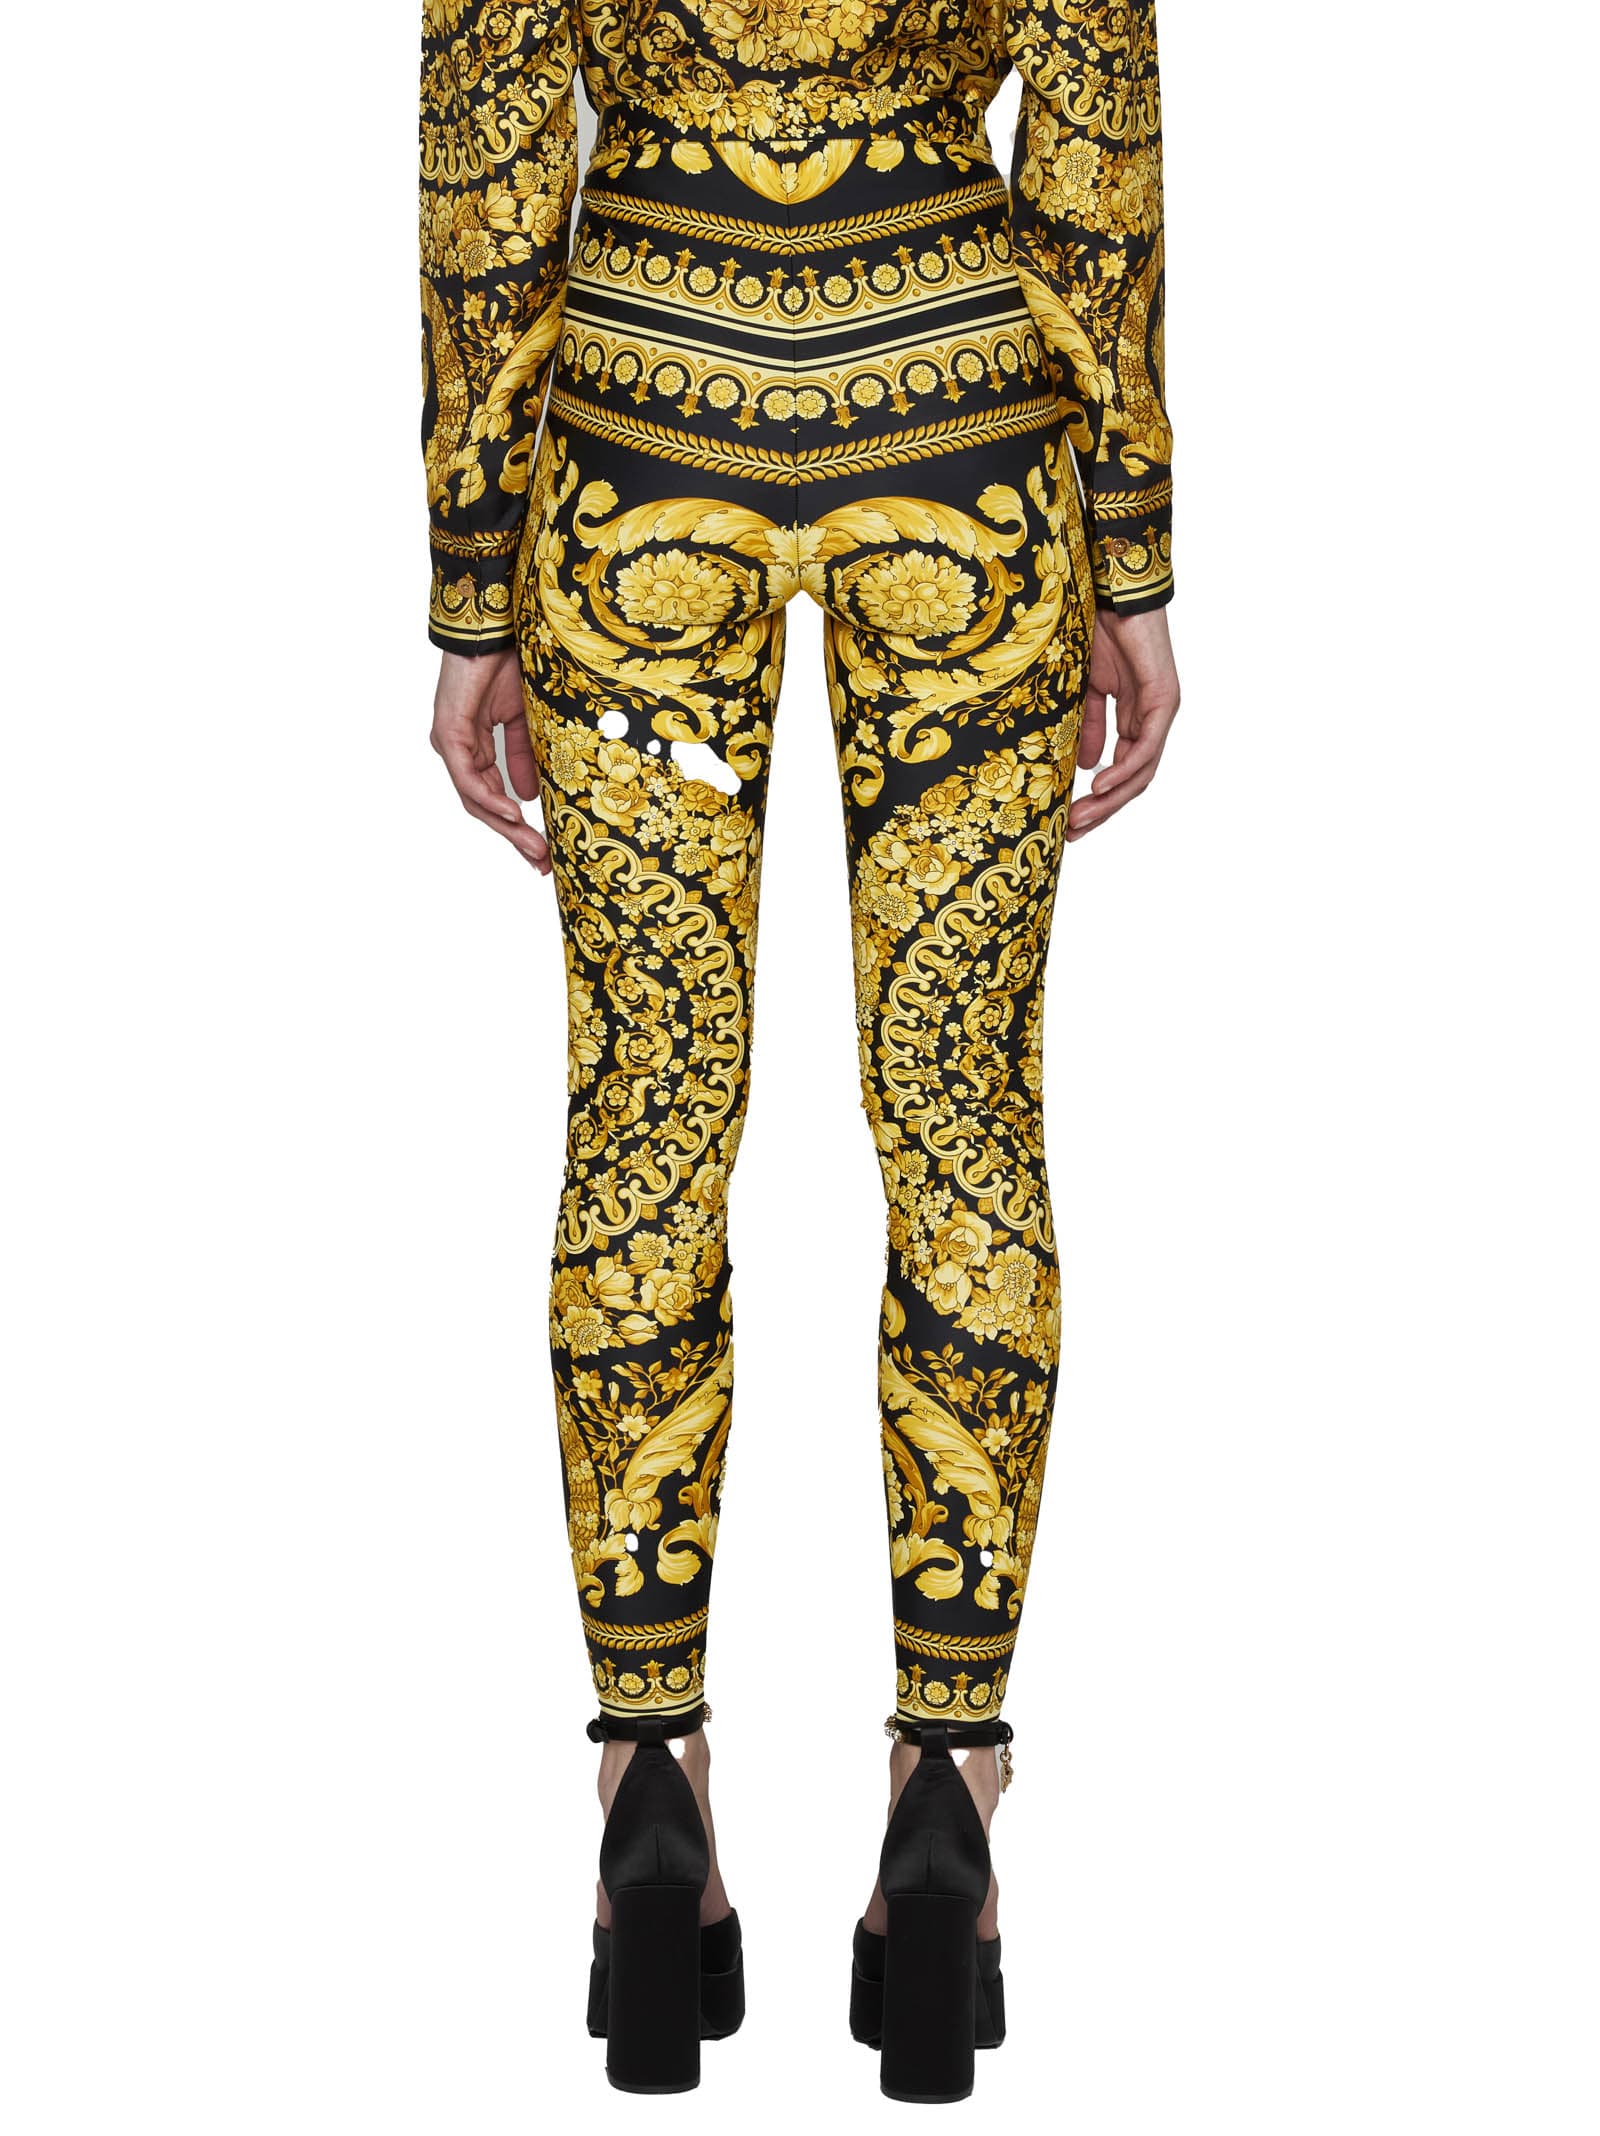 Versace Black And Gold Leggings With Baroque Print In Multi-colored